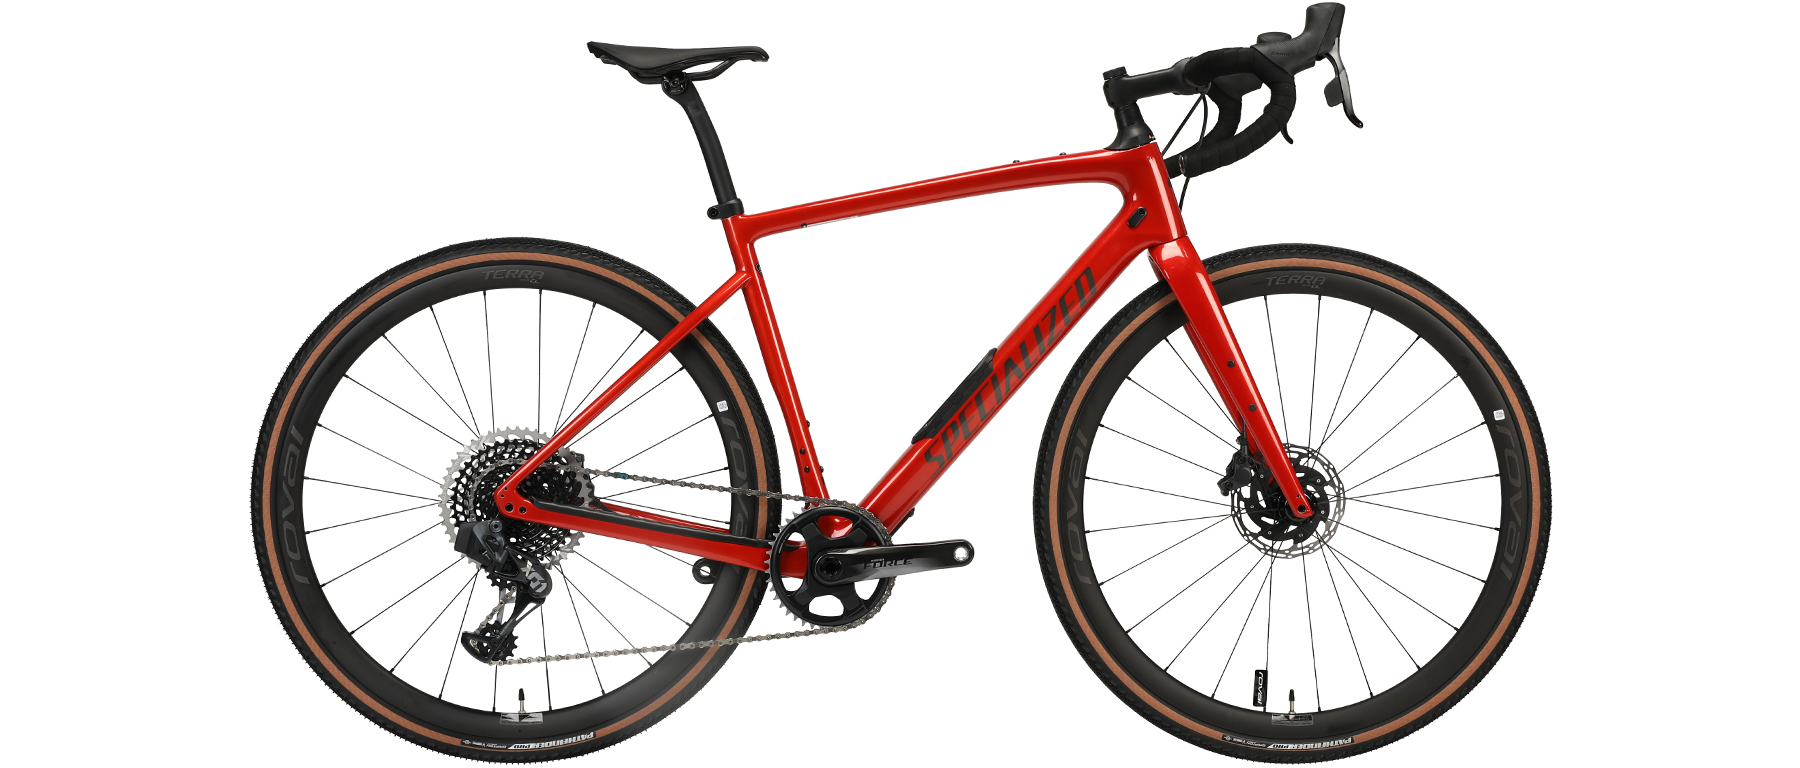 Specialized Diverge Pro Carbon Bicycle